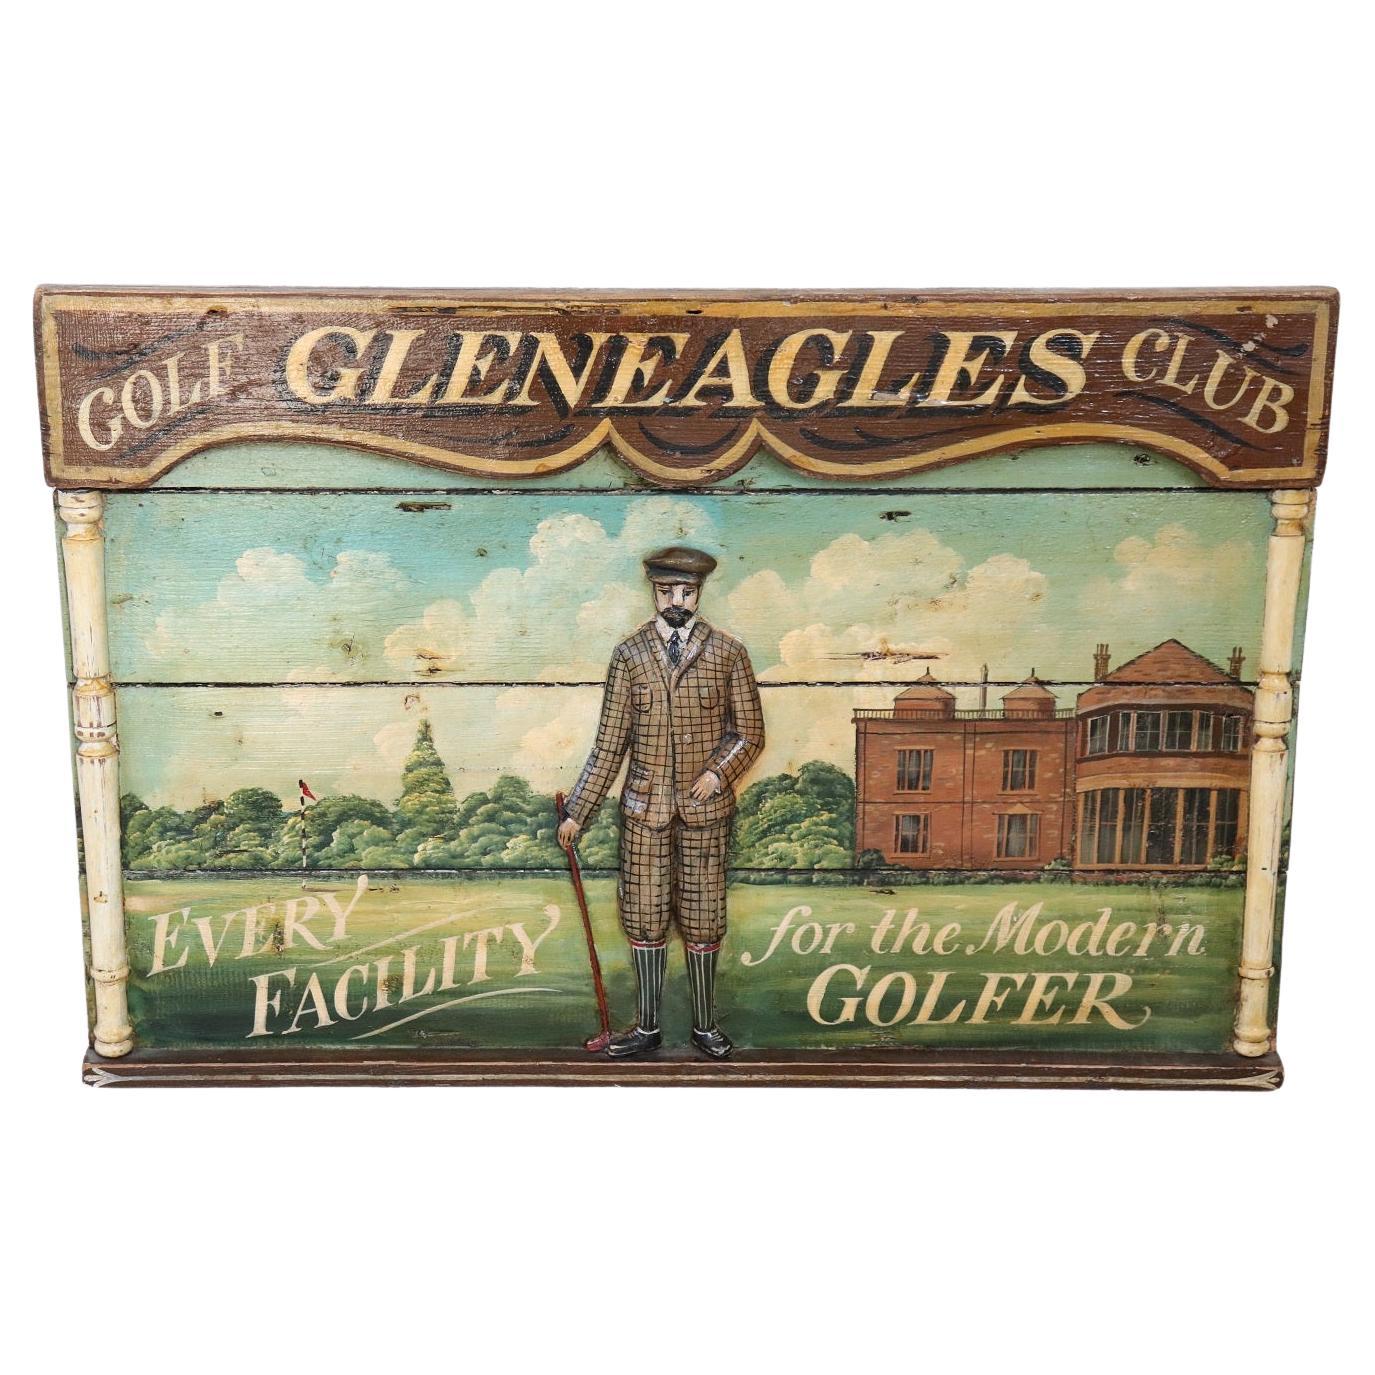 Vintage Hand Painted Historic Golf Club Sign on Wood, 1920s